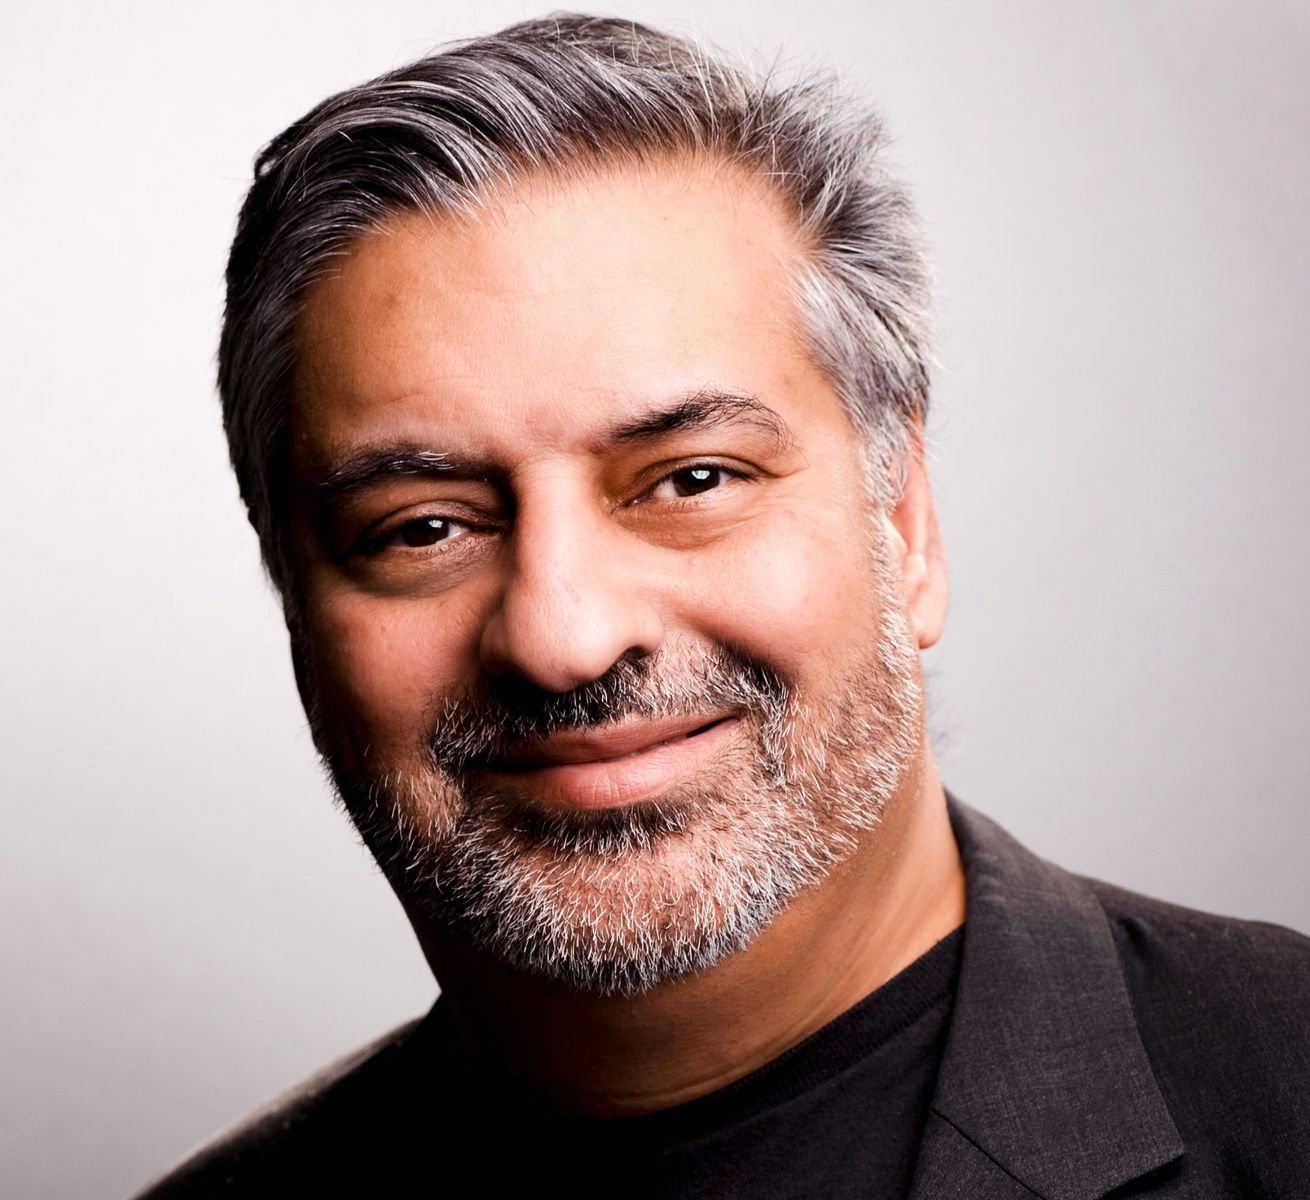 Rohit Talwar, Author of Aftershocks and Opportunities 2:Navigating the Next Horizon, and CEO of Fast Future